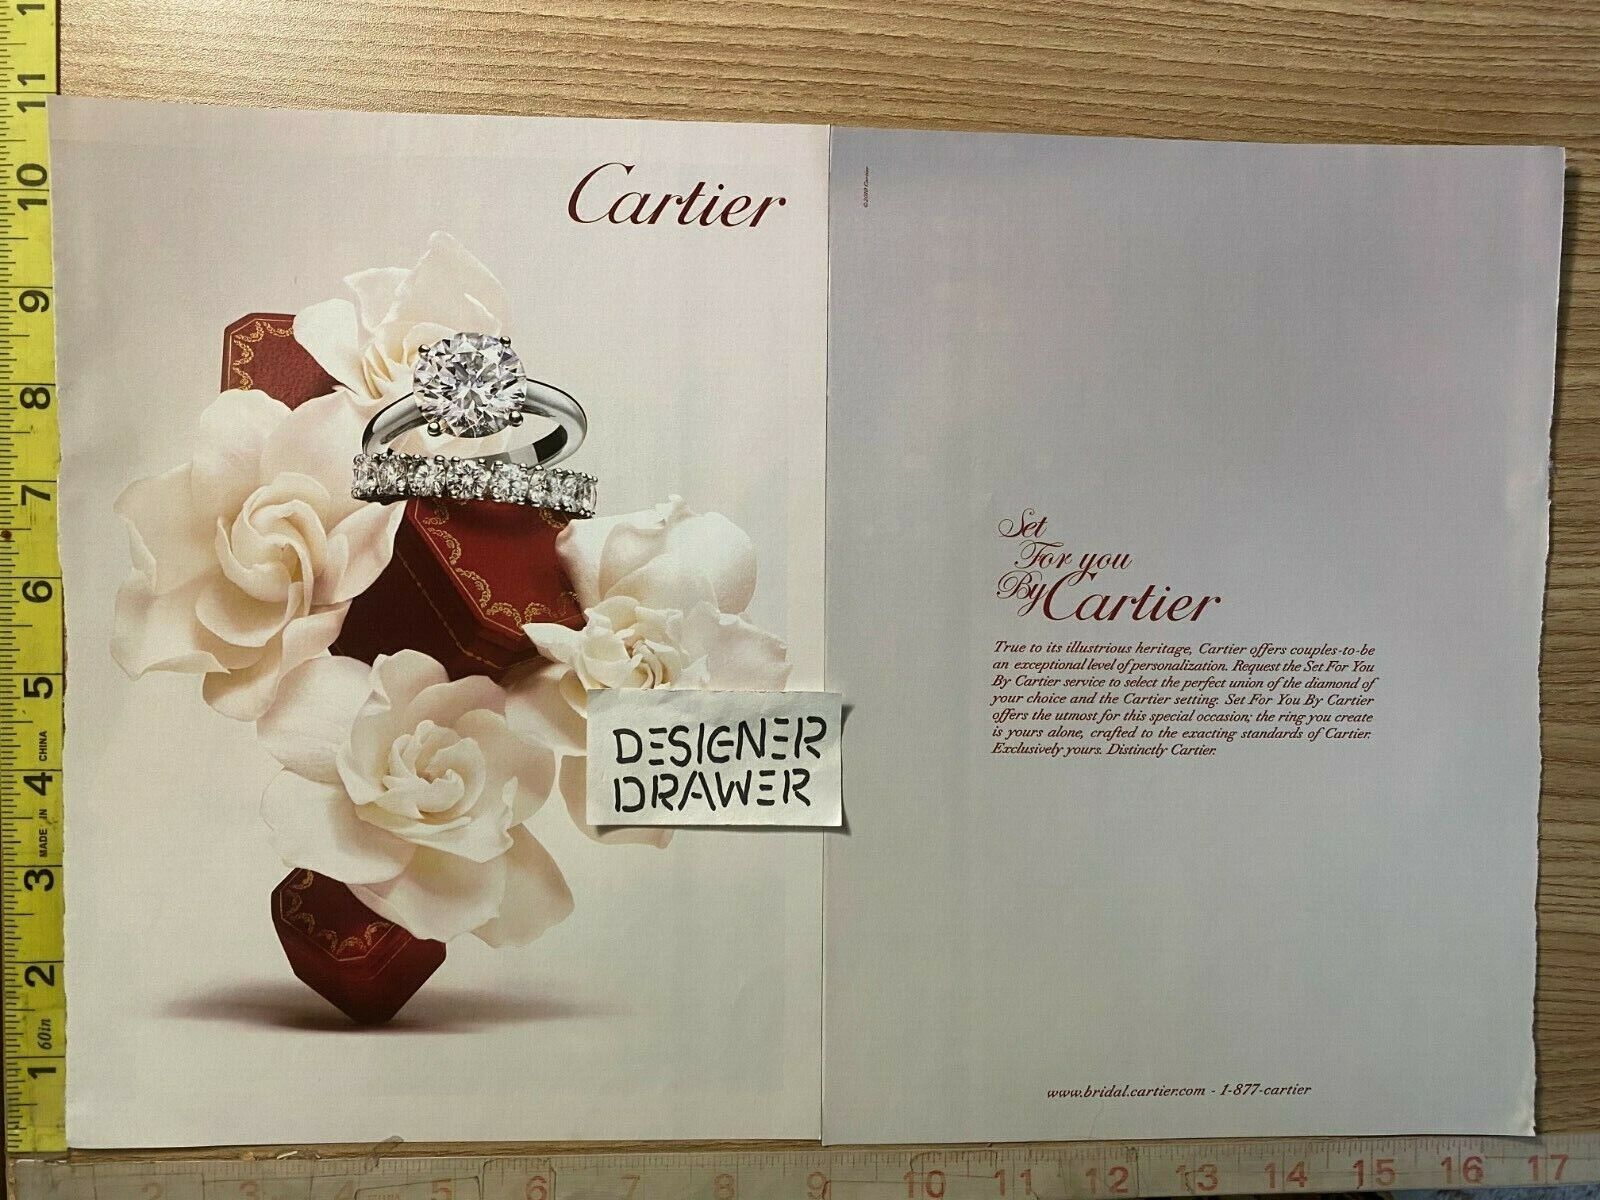 Cartier Wedding Bad Set 2010 2 pg. Print Ad Advertisement: White Roses & Boxes